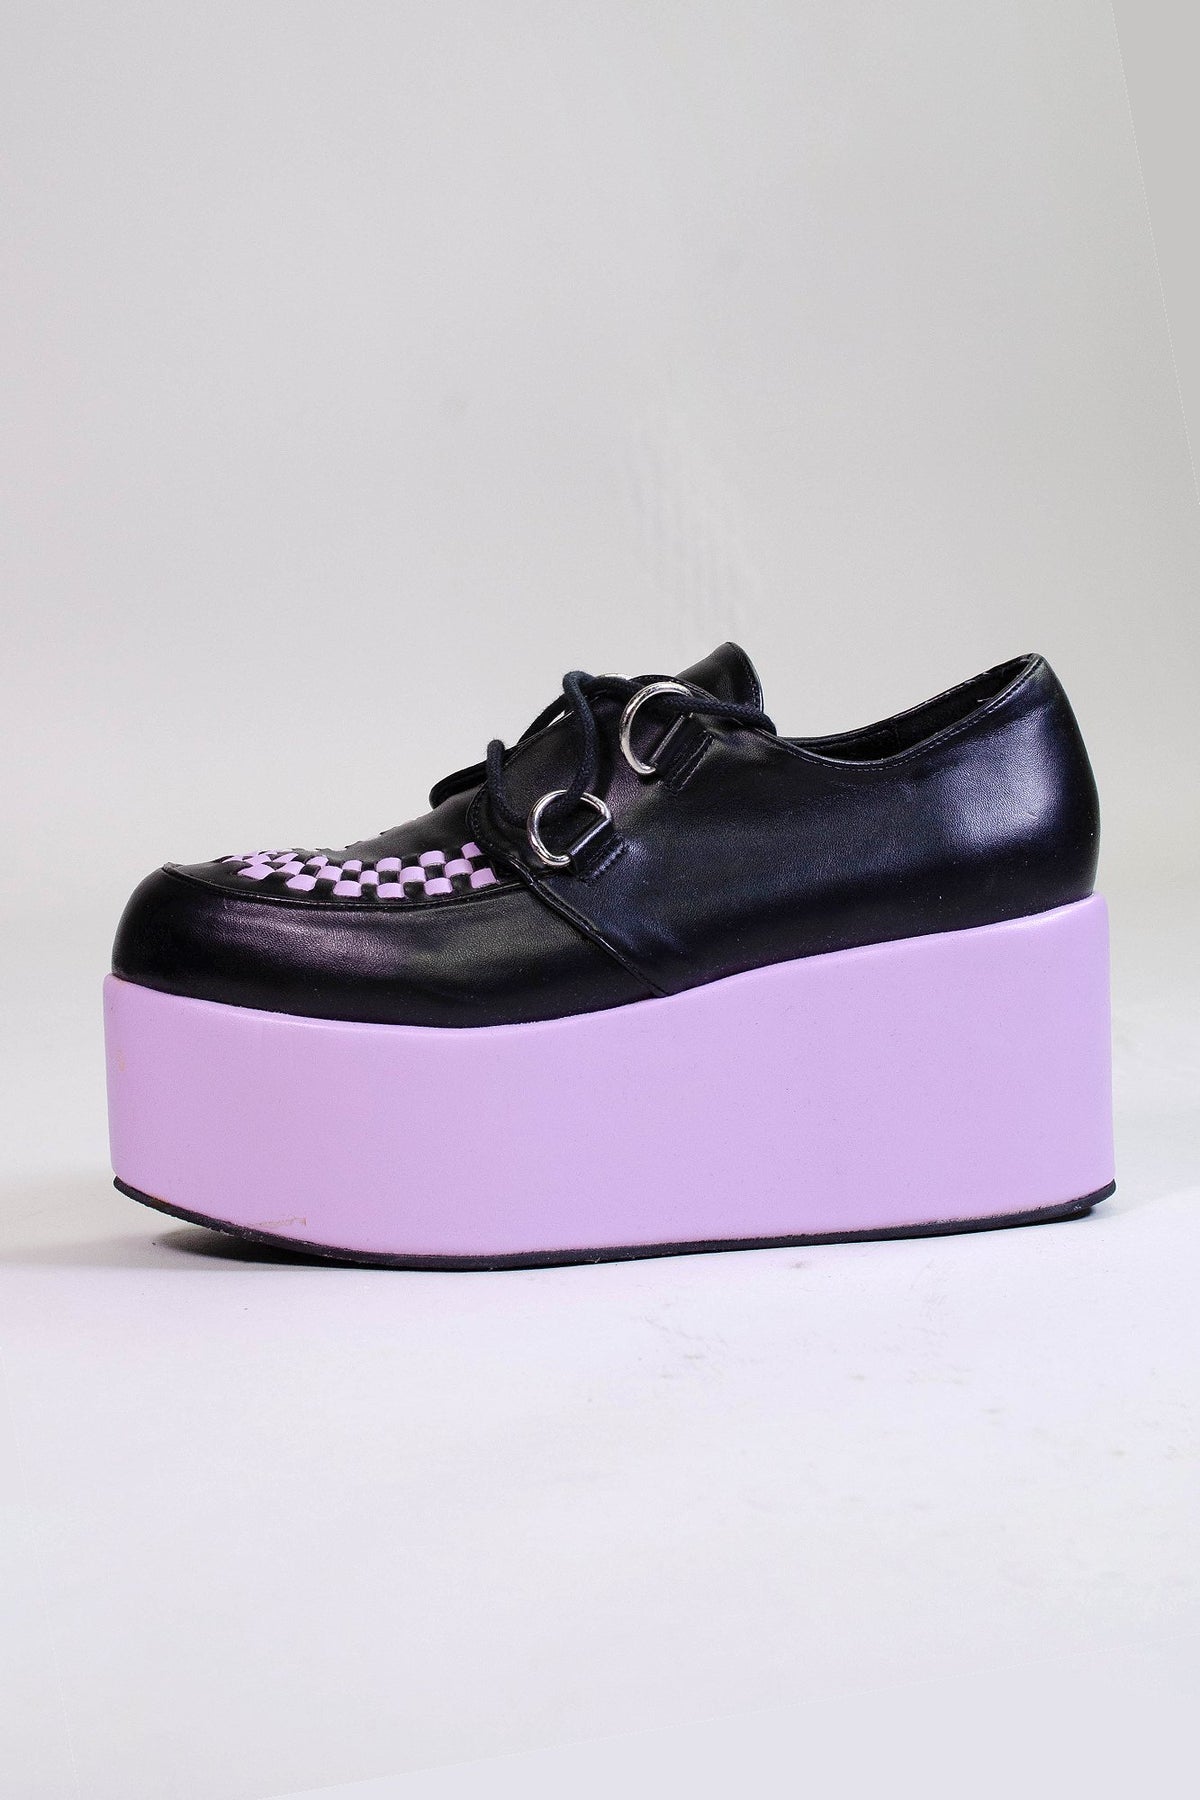 Pastel Goth Black And Lilac Platform Shoes - In Control Clothing